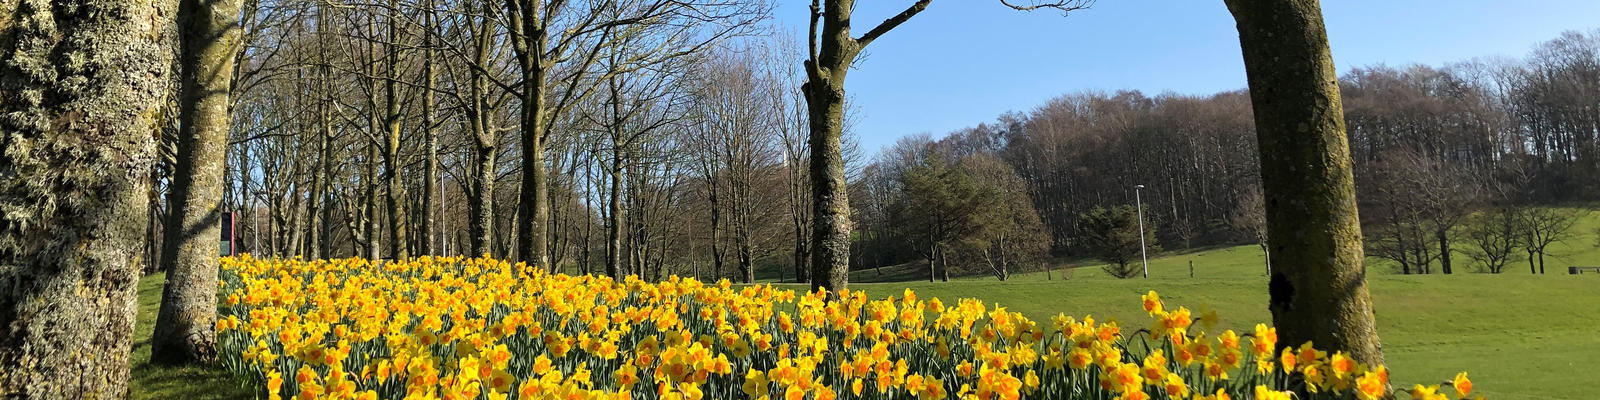 Image of the Grounds of the University, a field of daffodils.